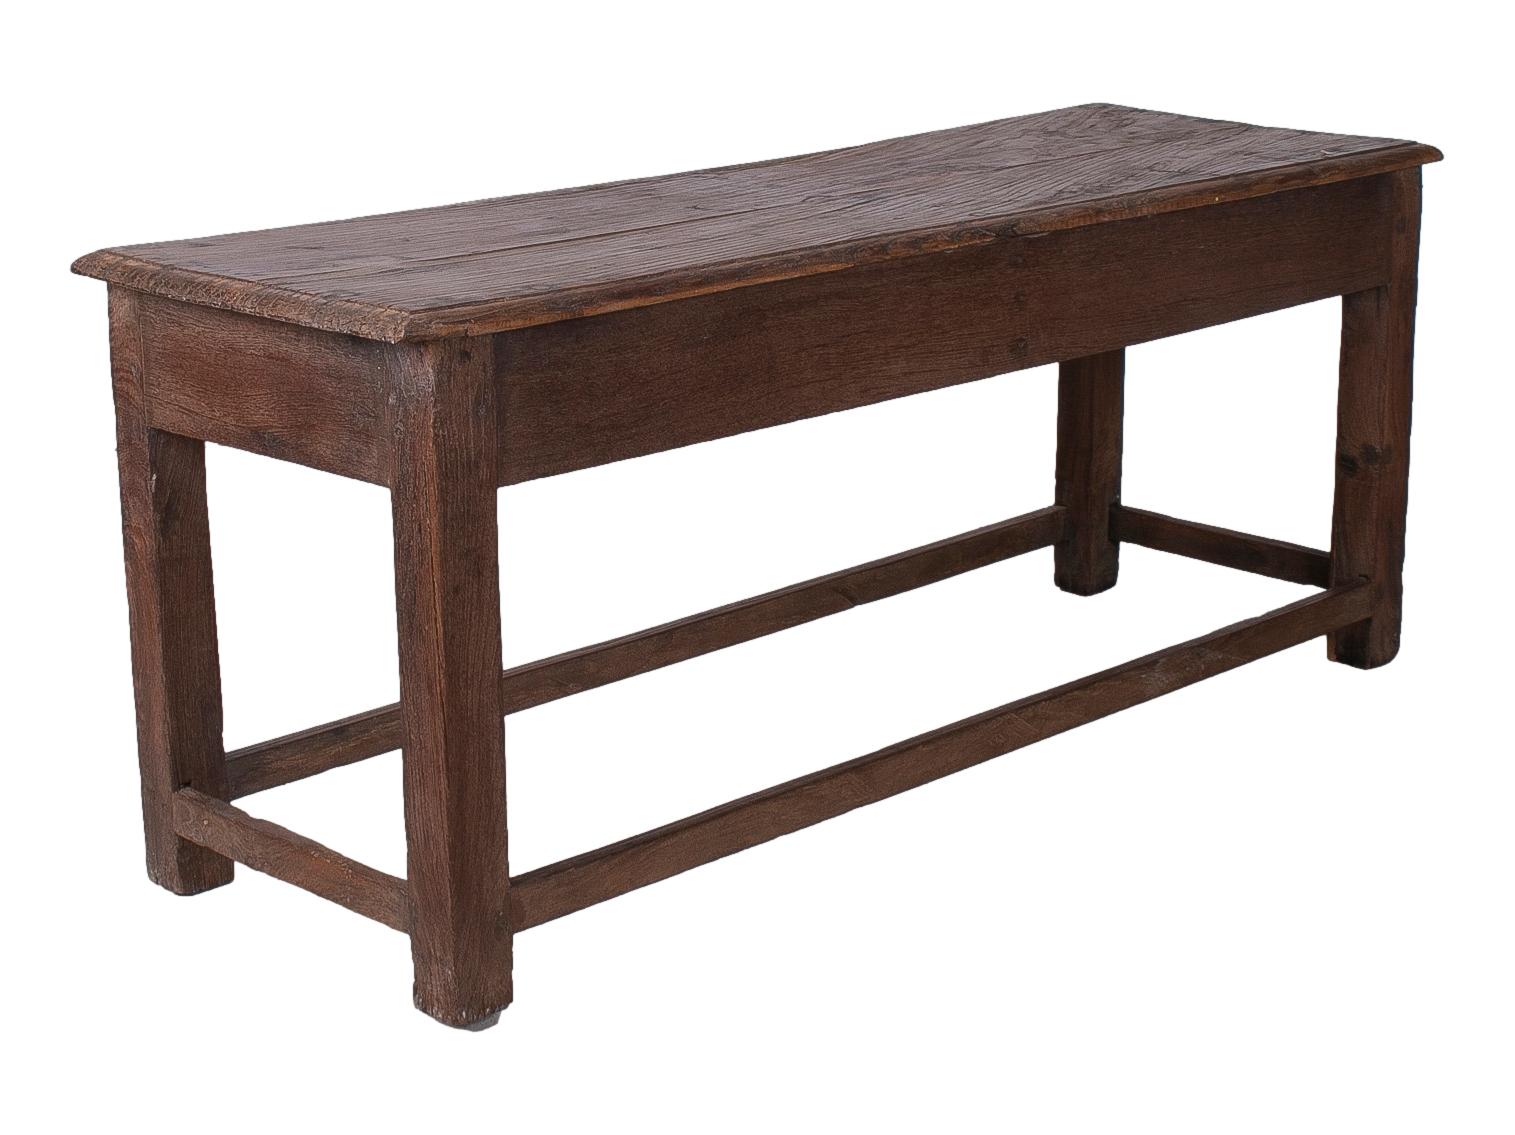 1970s Spanish Industrial Wooden 2-Drawer Table w/ Crossbeam Legs For Sale 1